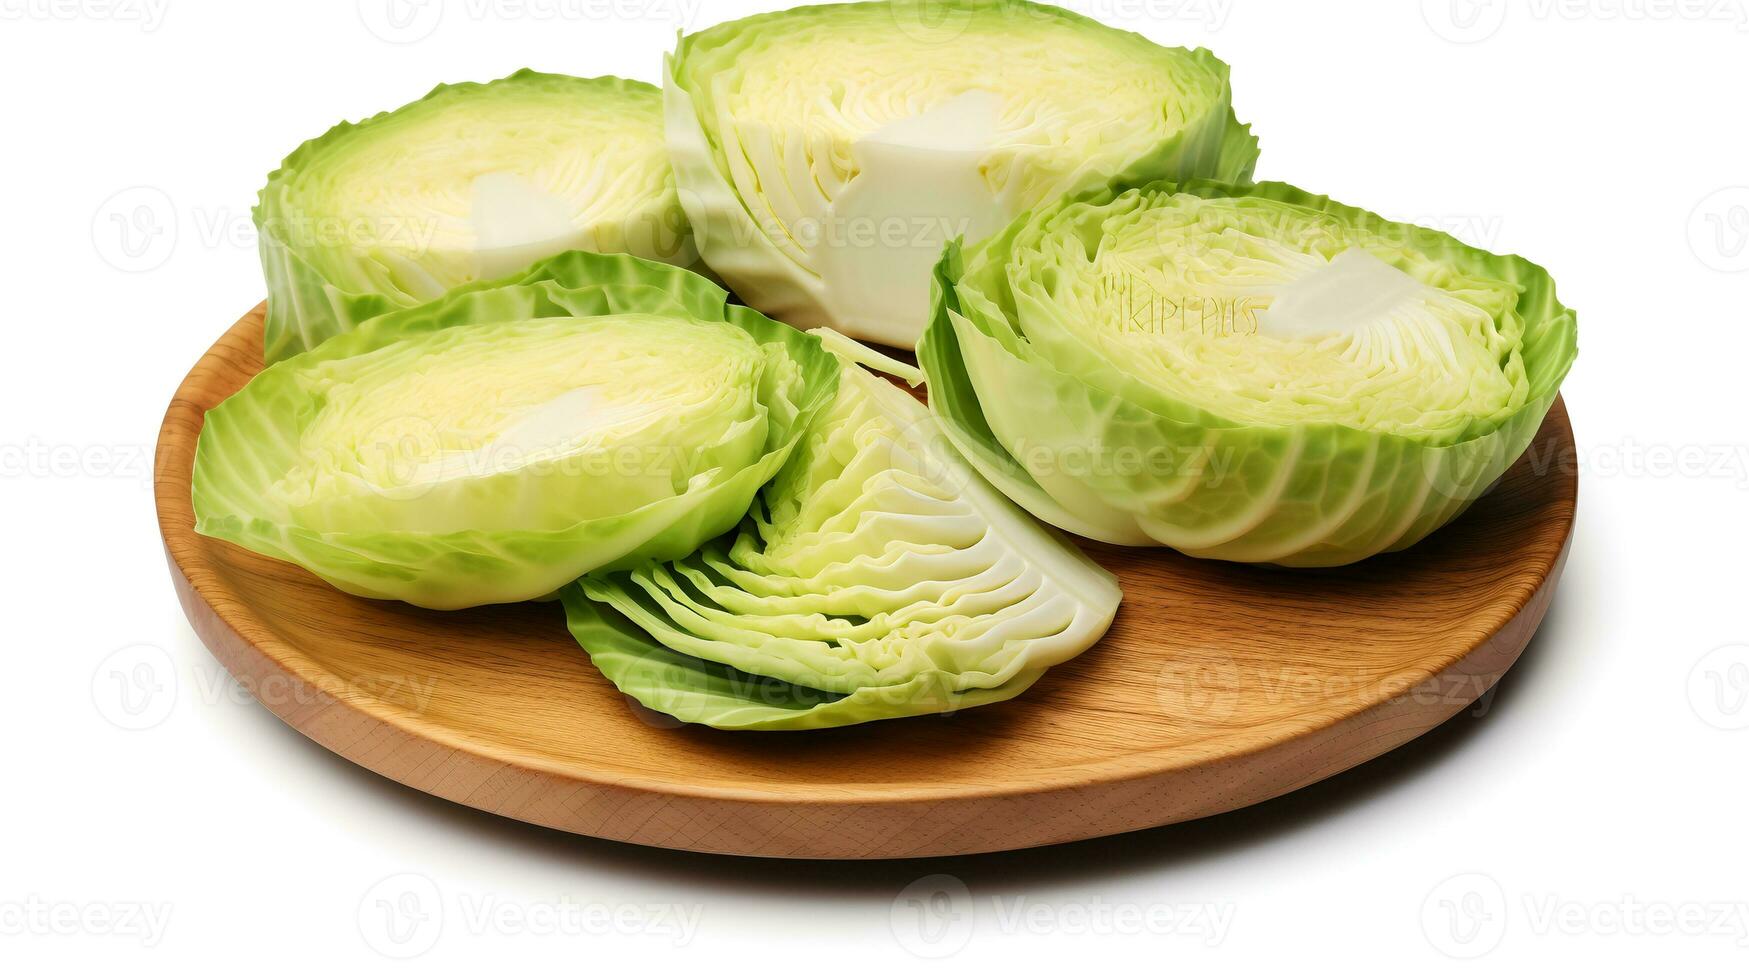 Photo of Sliced Cabbage on a plate isolated on white background